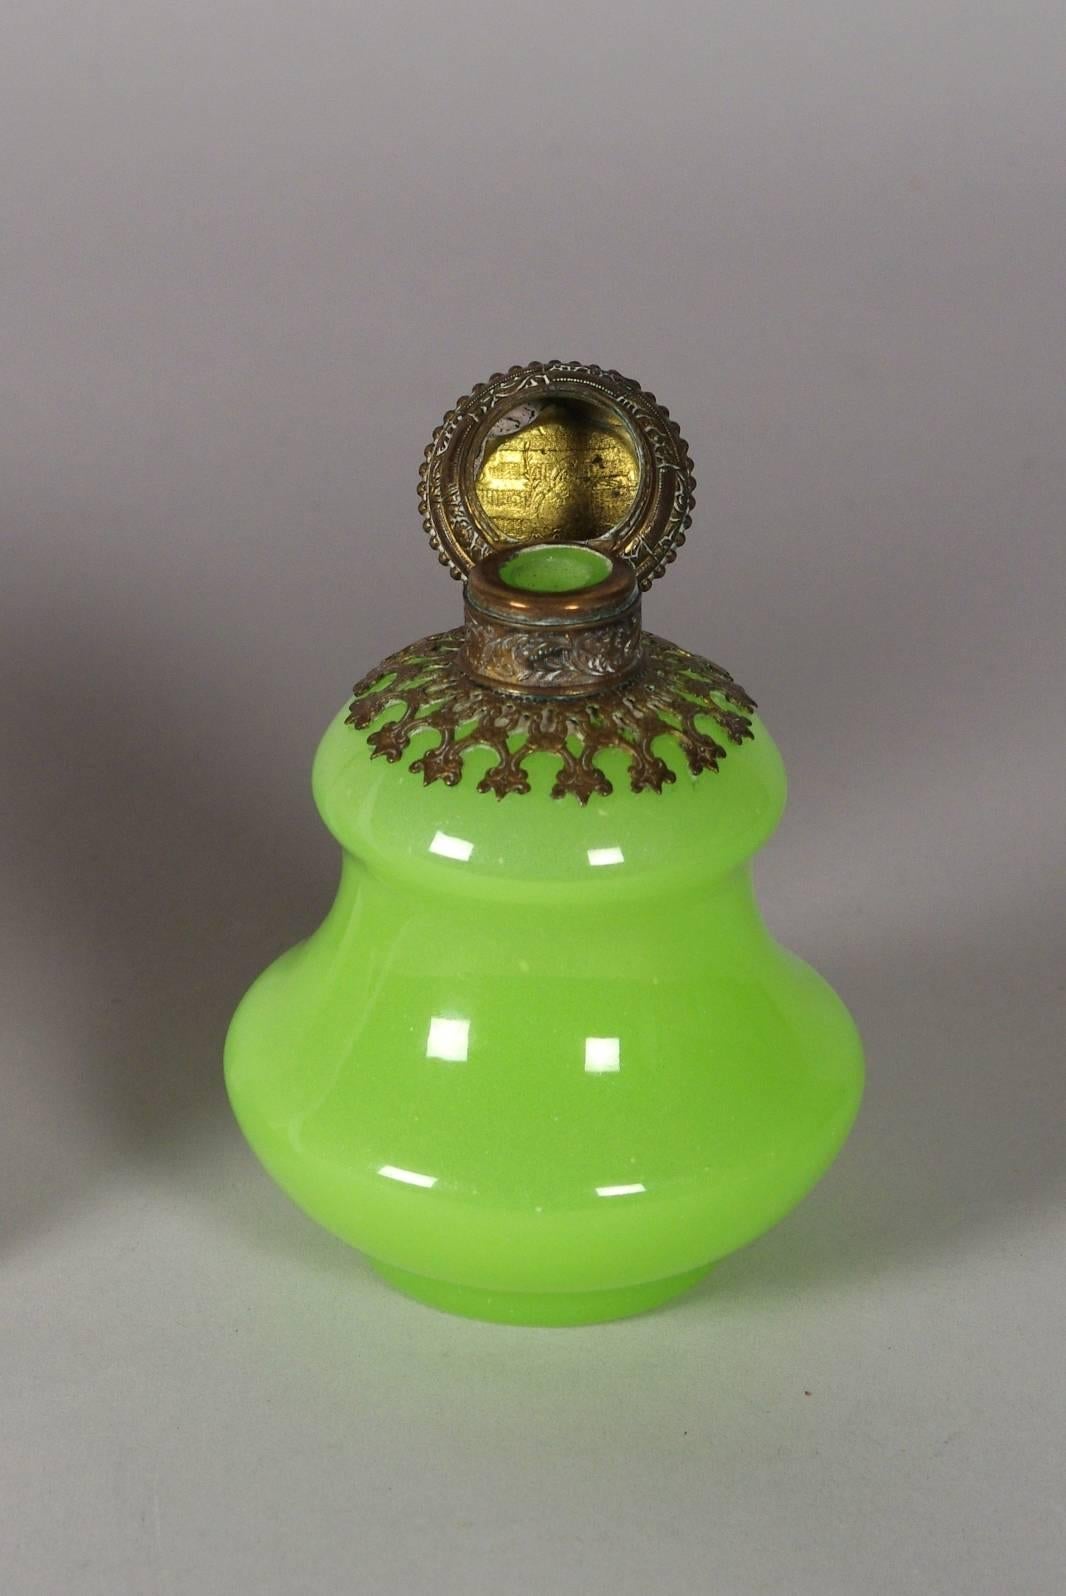 Green opaline pagoda shaped perfume bottle with ormolu mounts. Stopper missing. With its smooth polished surface, luminous color and sophisticated pagoda-like shape, opaline of this quality is often attributed to the Baccarat factory. The fine